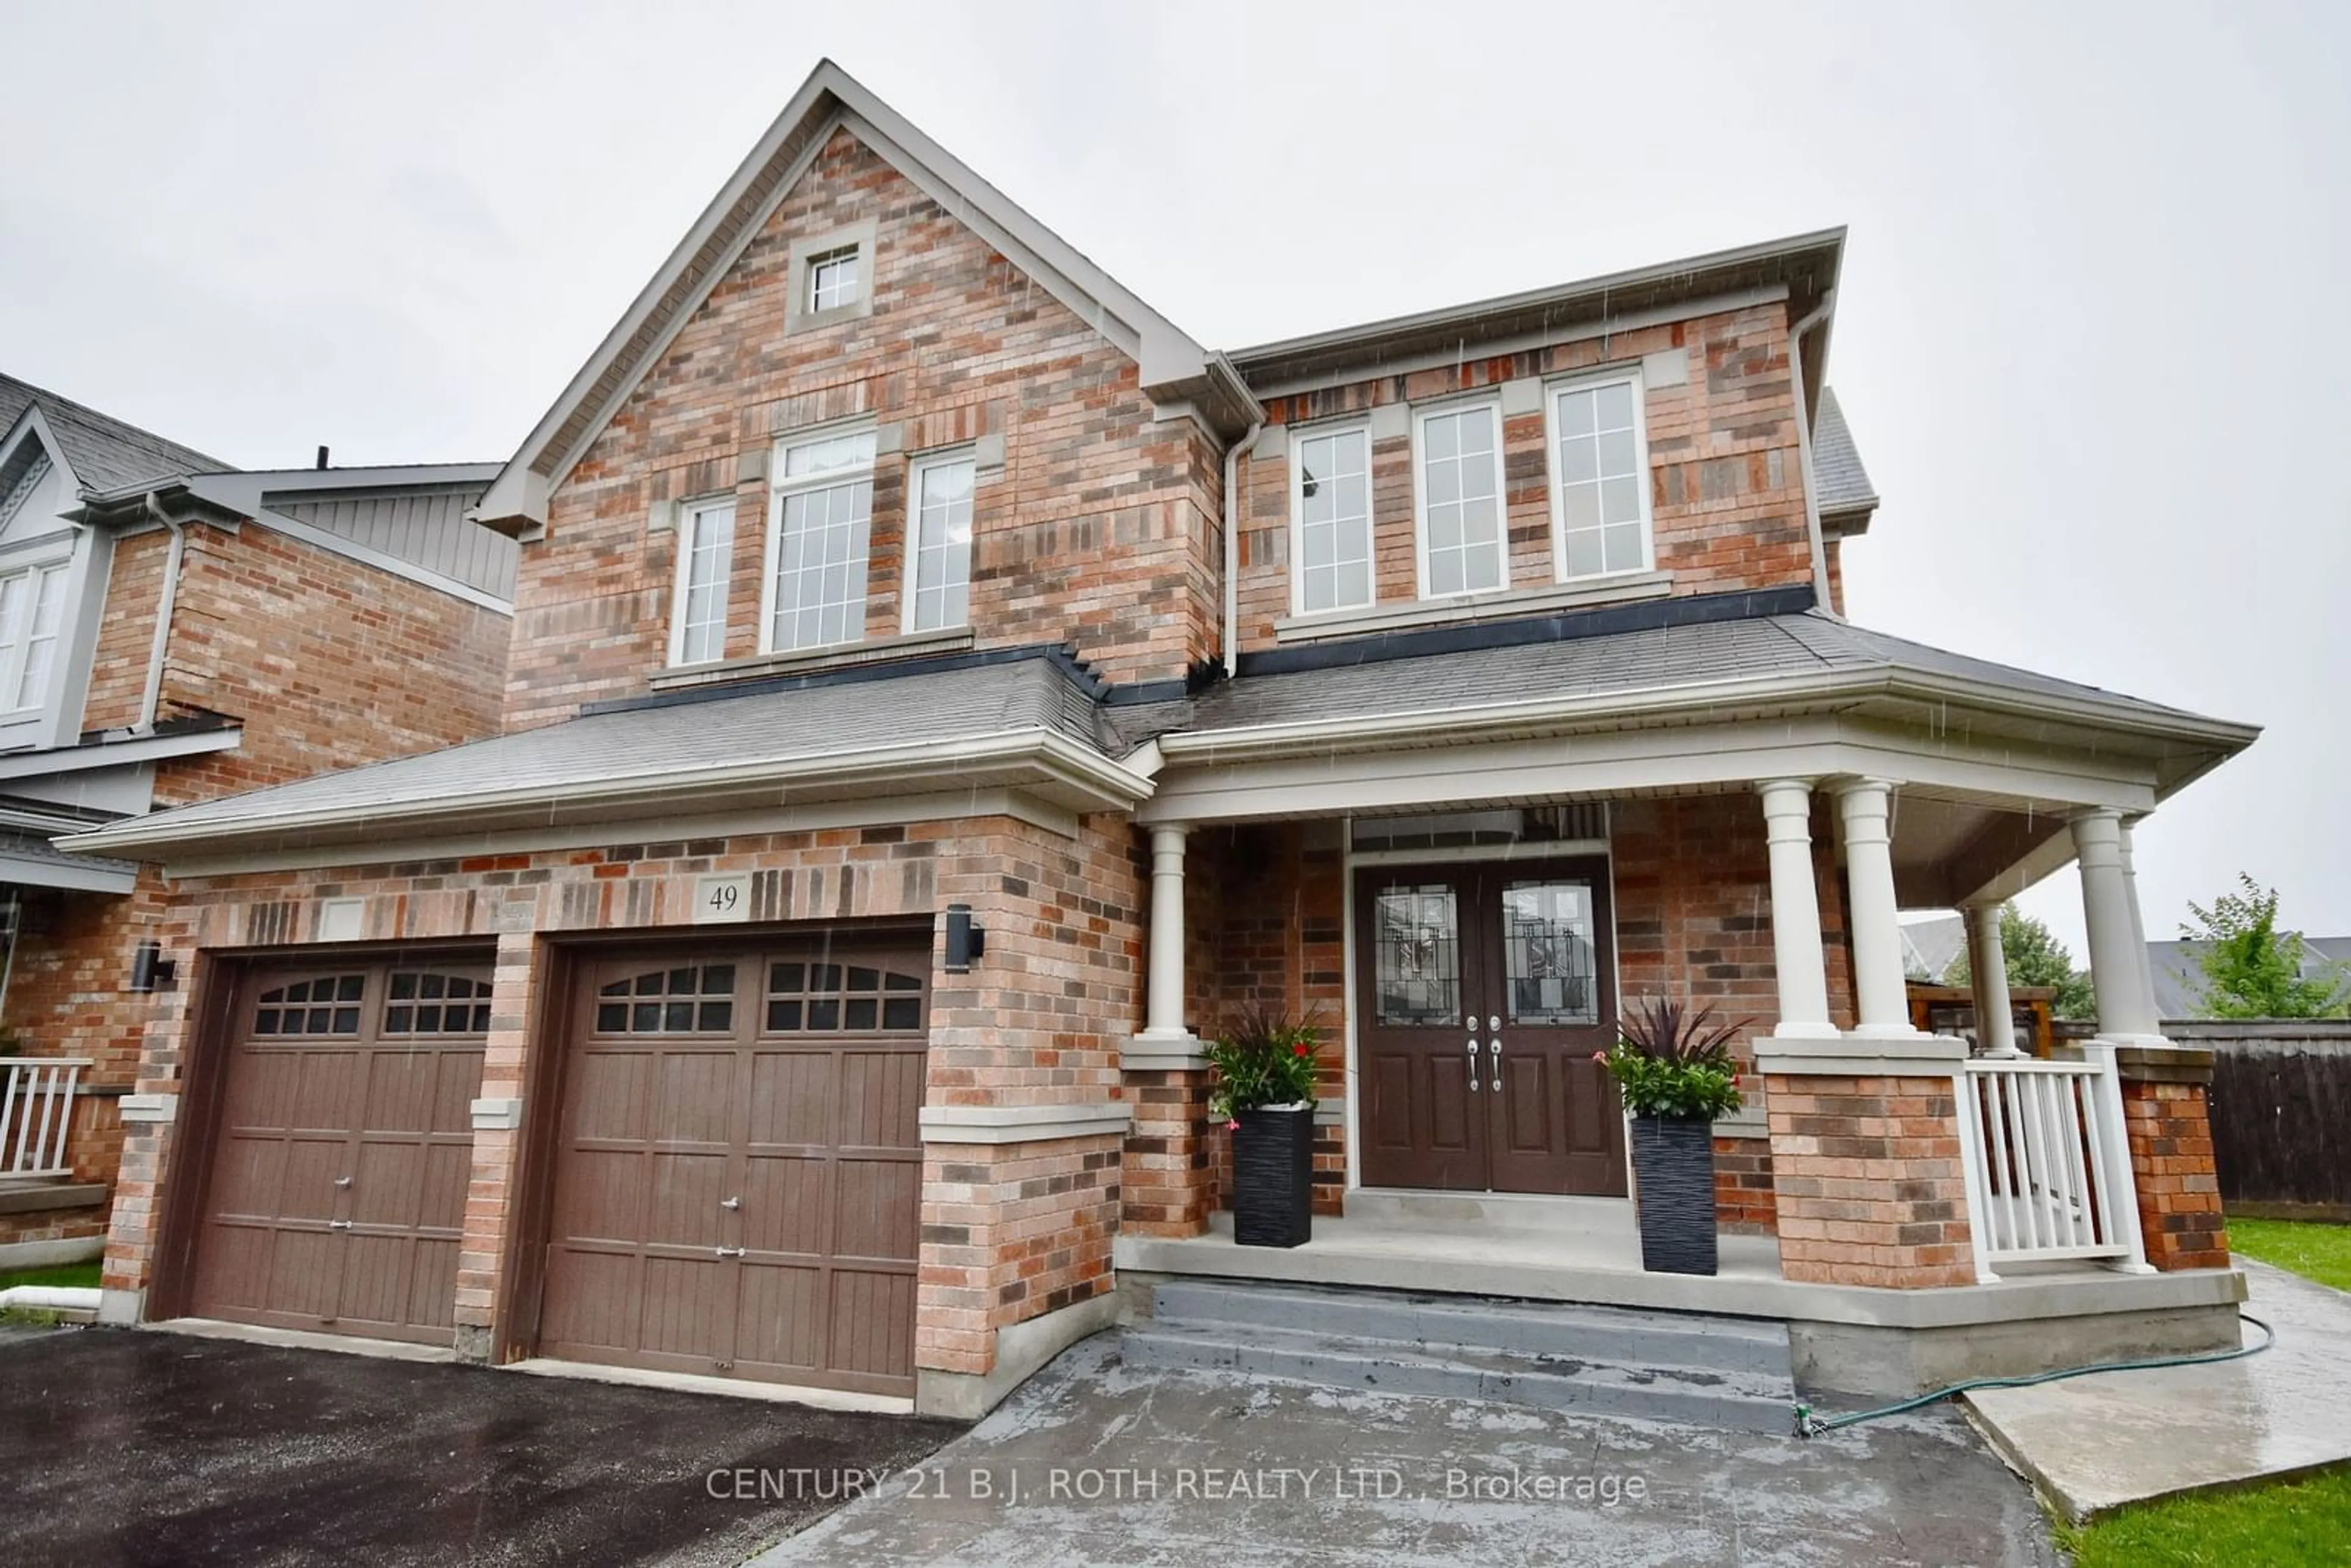 Home with brick exterior material for 49 Corwin Dr, Bradford West Gwillimbury Ontario L3Z 0E4